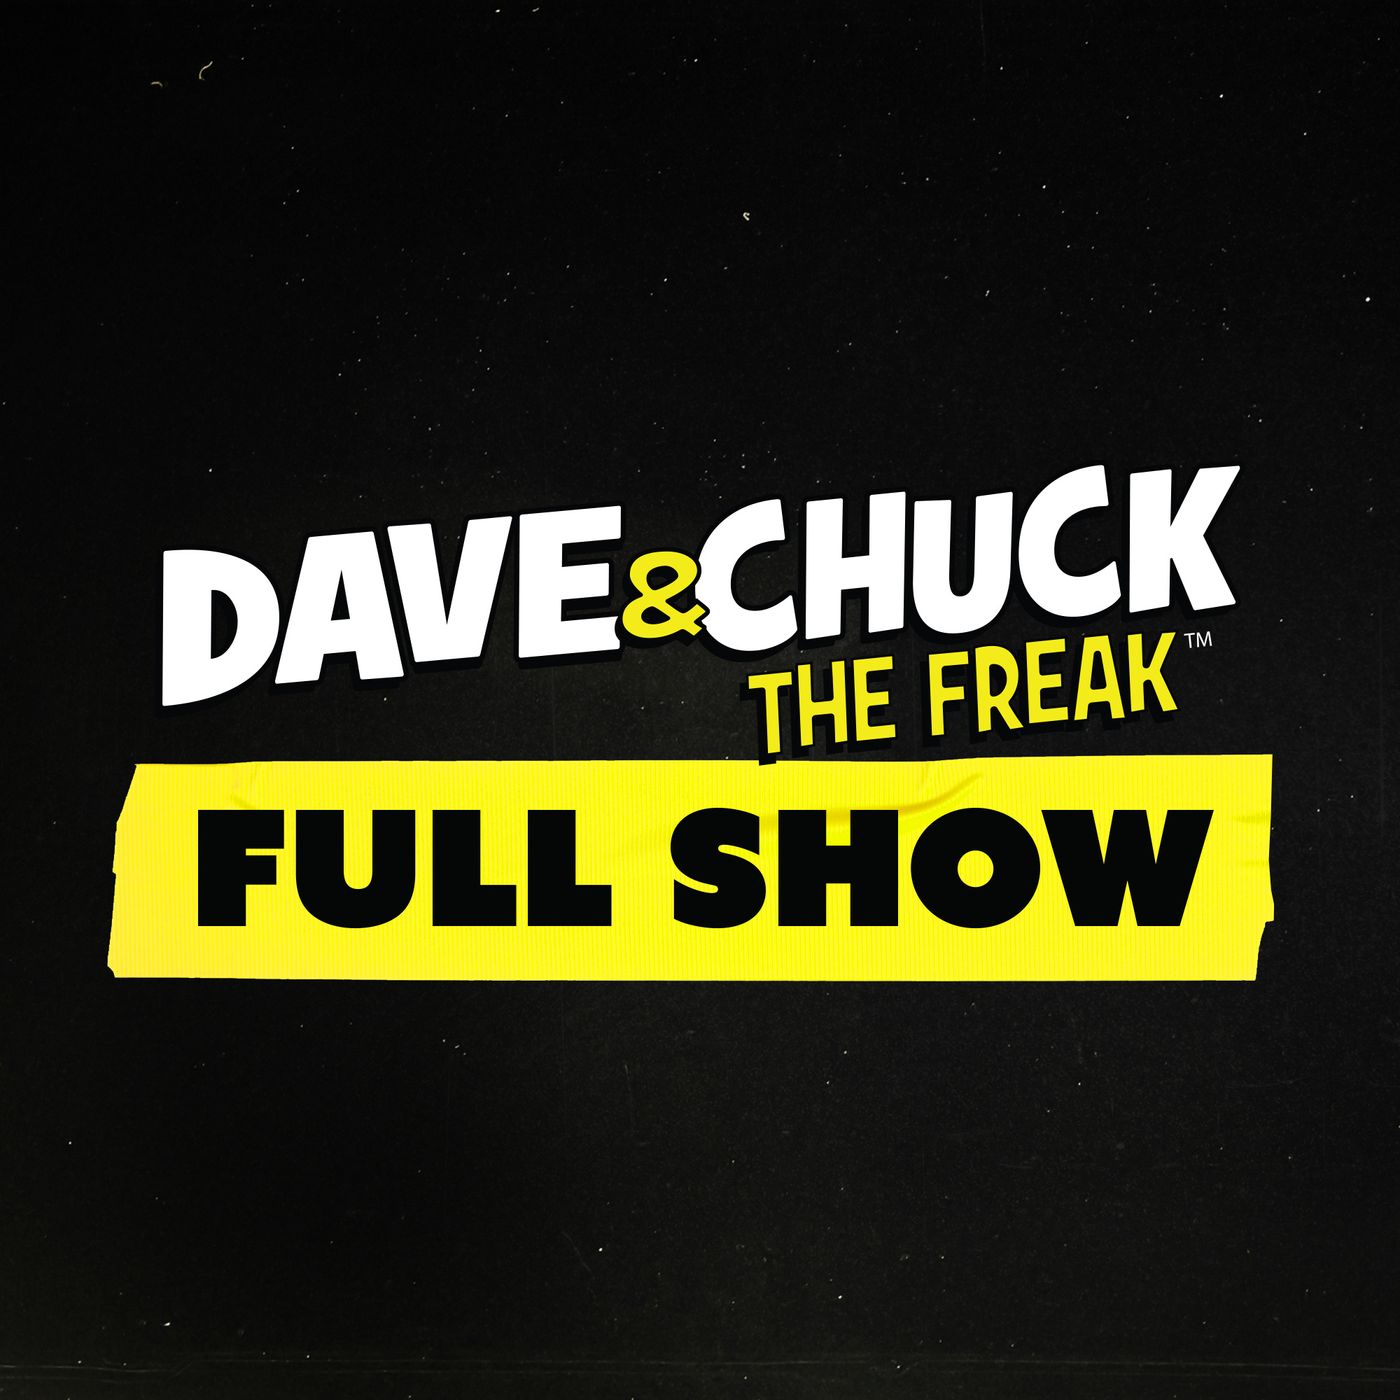 Friday, May 19th 2023 Dave & Chuck the Freak Full Show